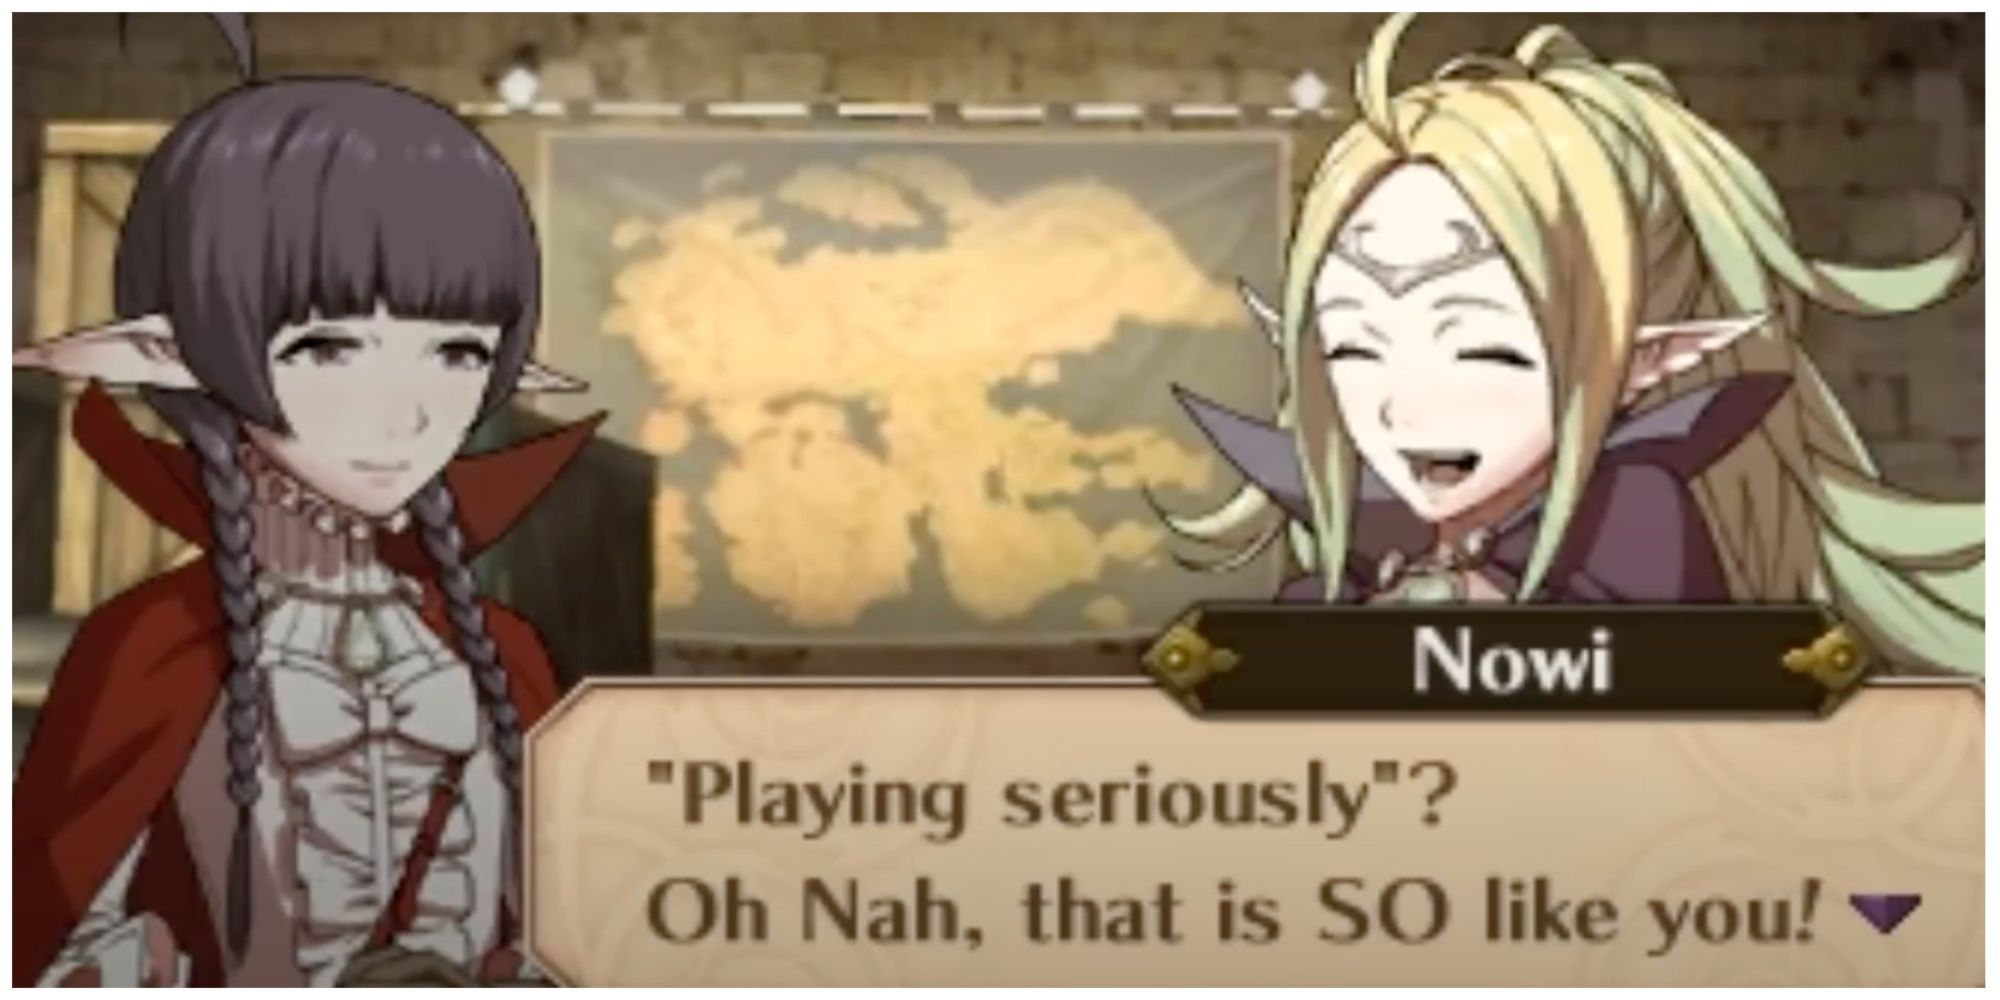 Nowi talking to Nah; "Playing seriously? Oh Nah, that is SO like you!"